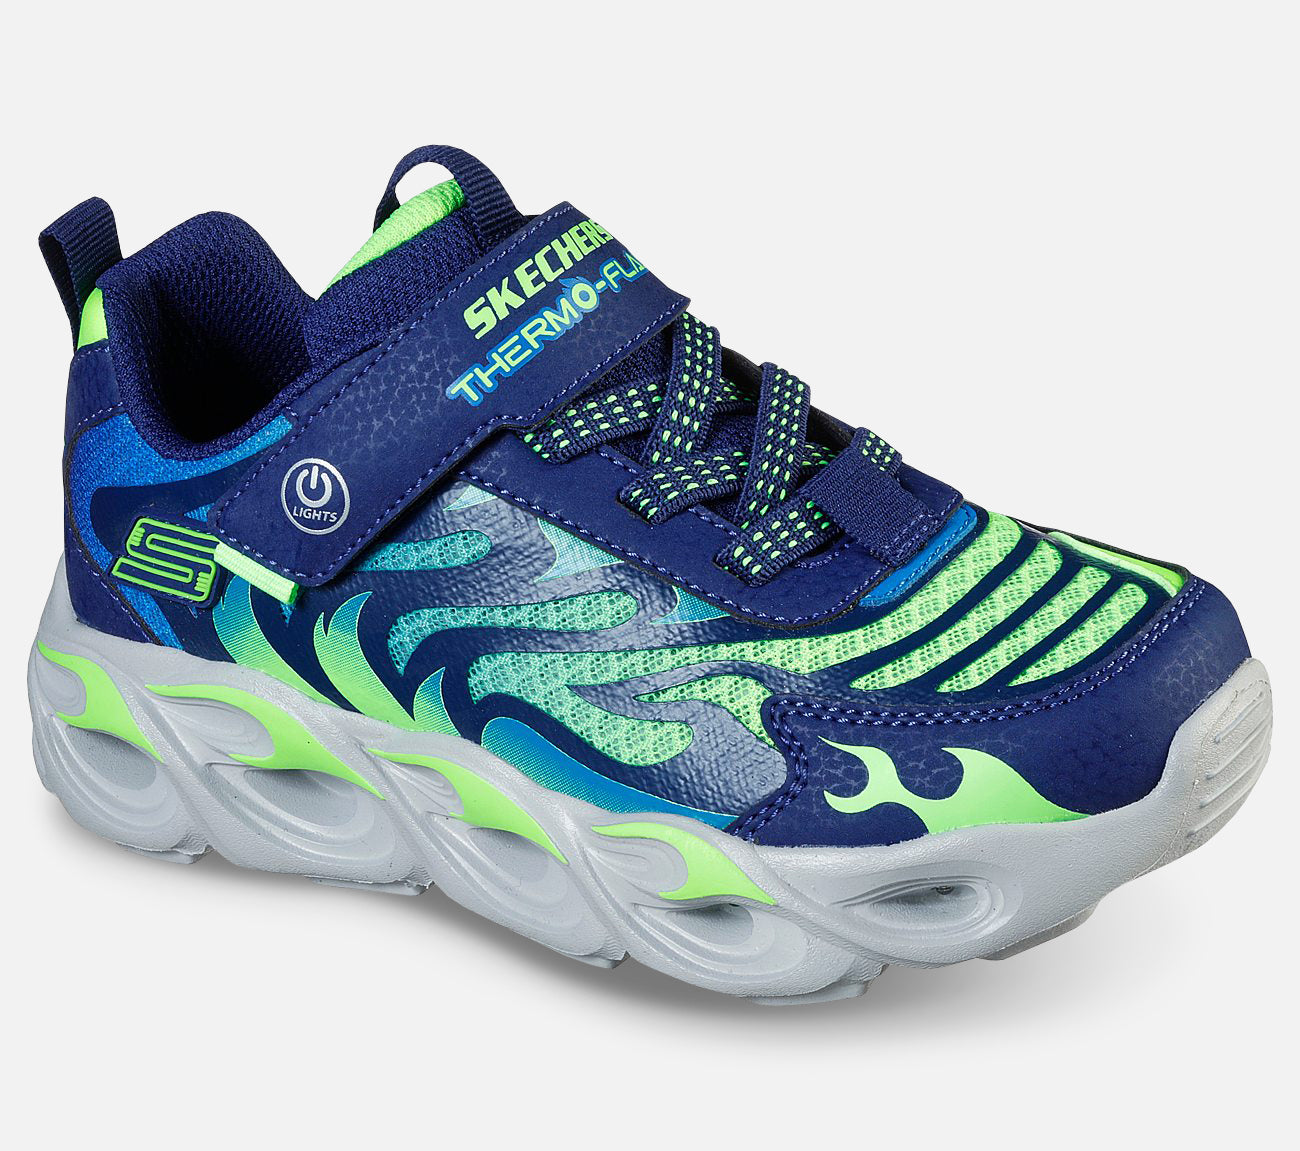 S-Lights Thermo - Flash Shoe Skechers